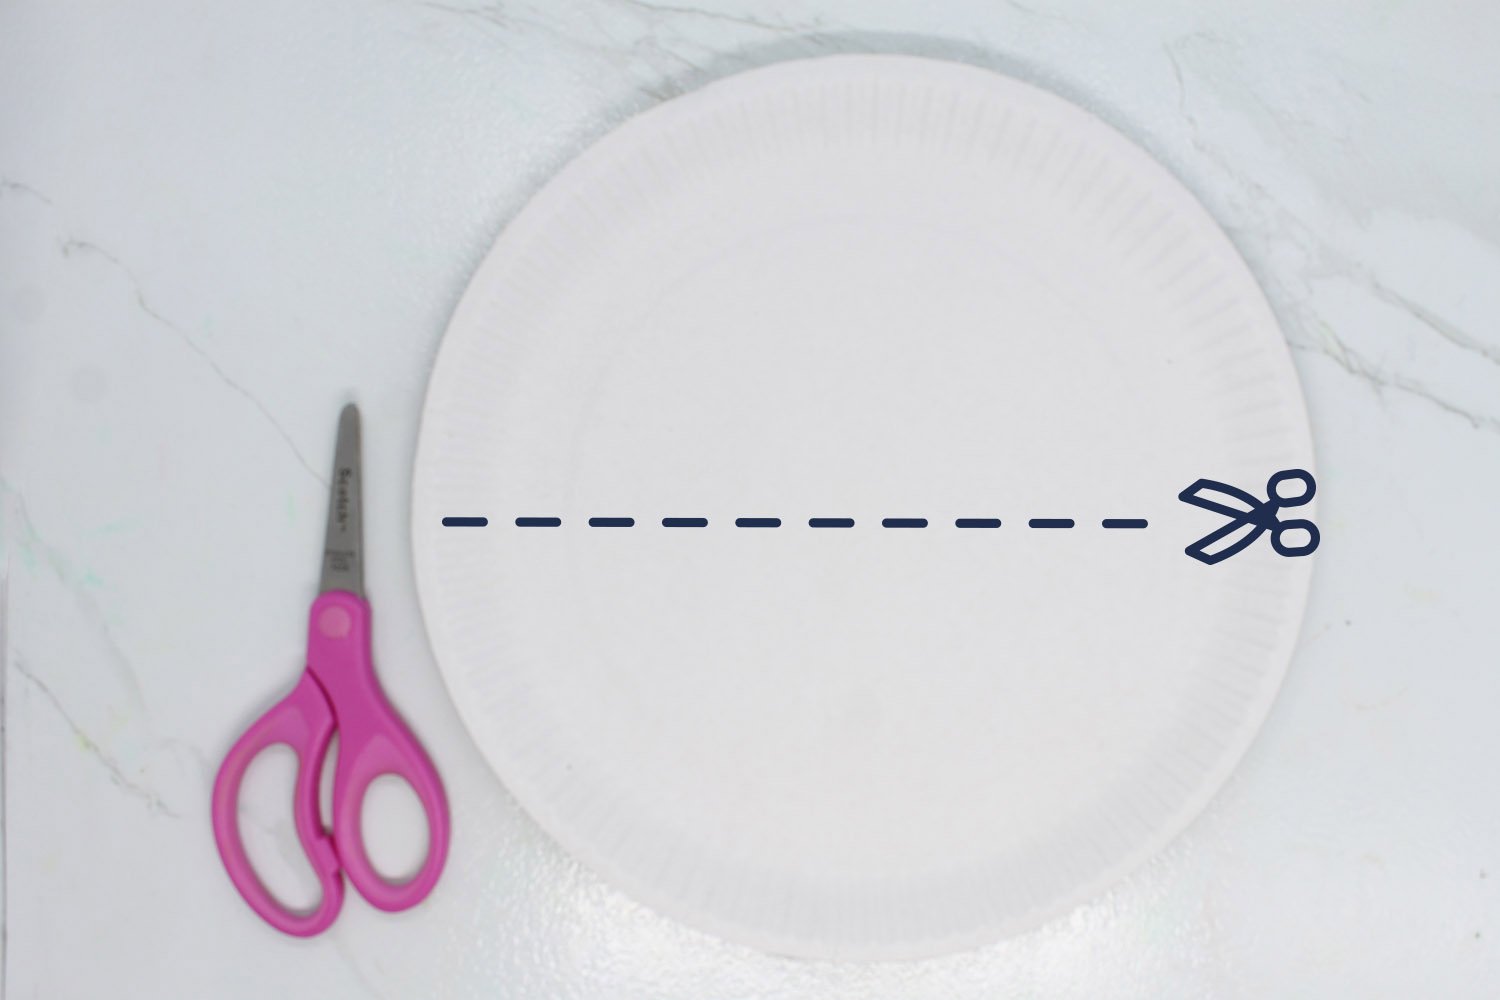 How to Make a Paper Plate Peacock - Step 011